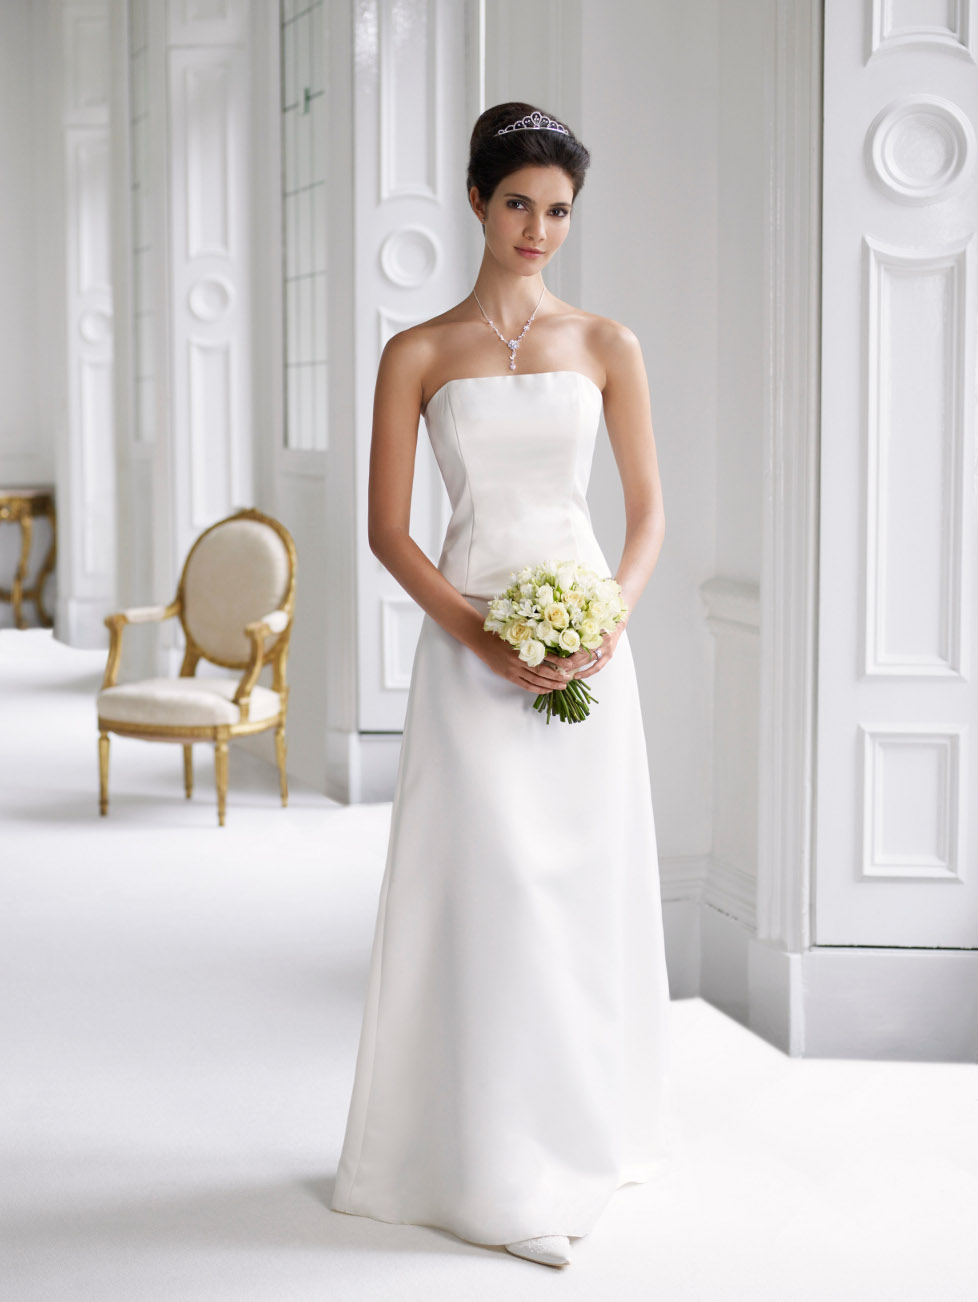 Download this Wedding Dresses picture